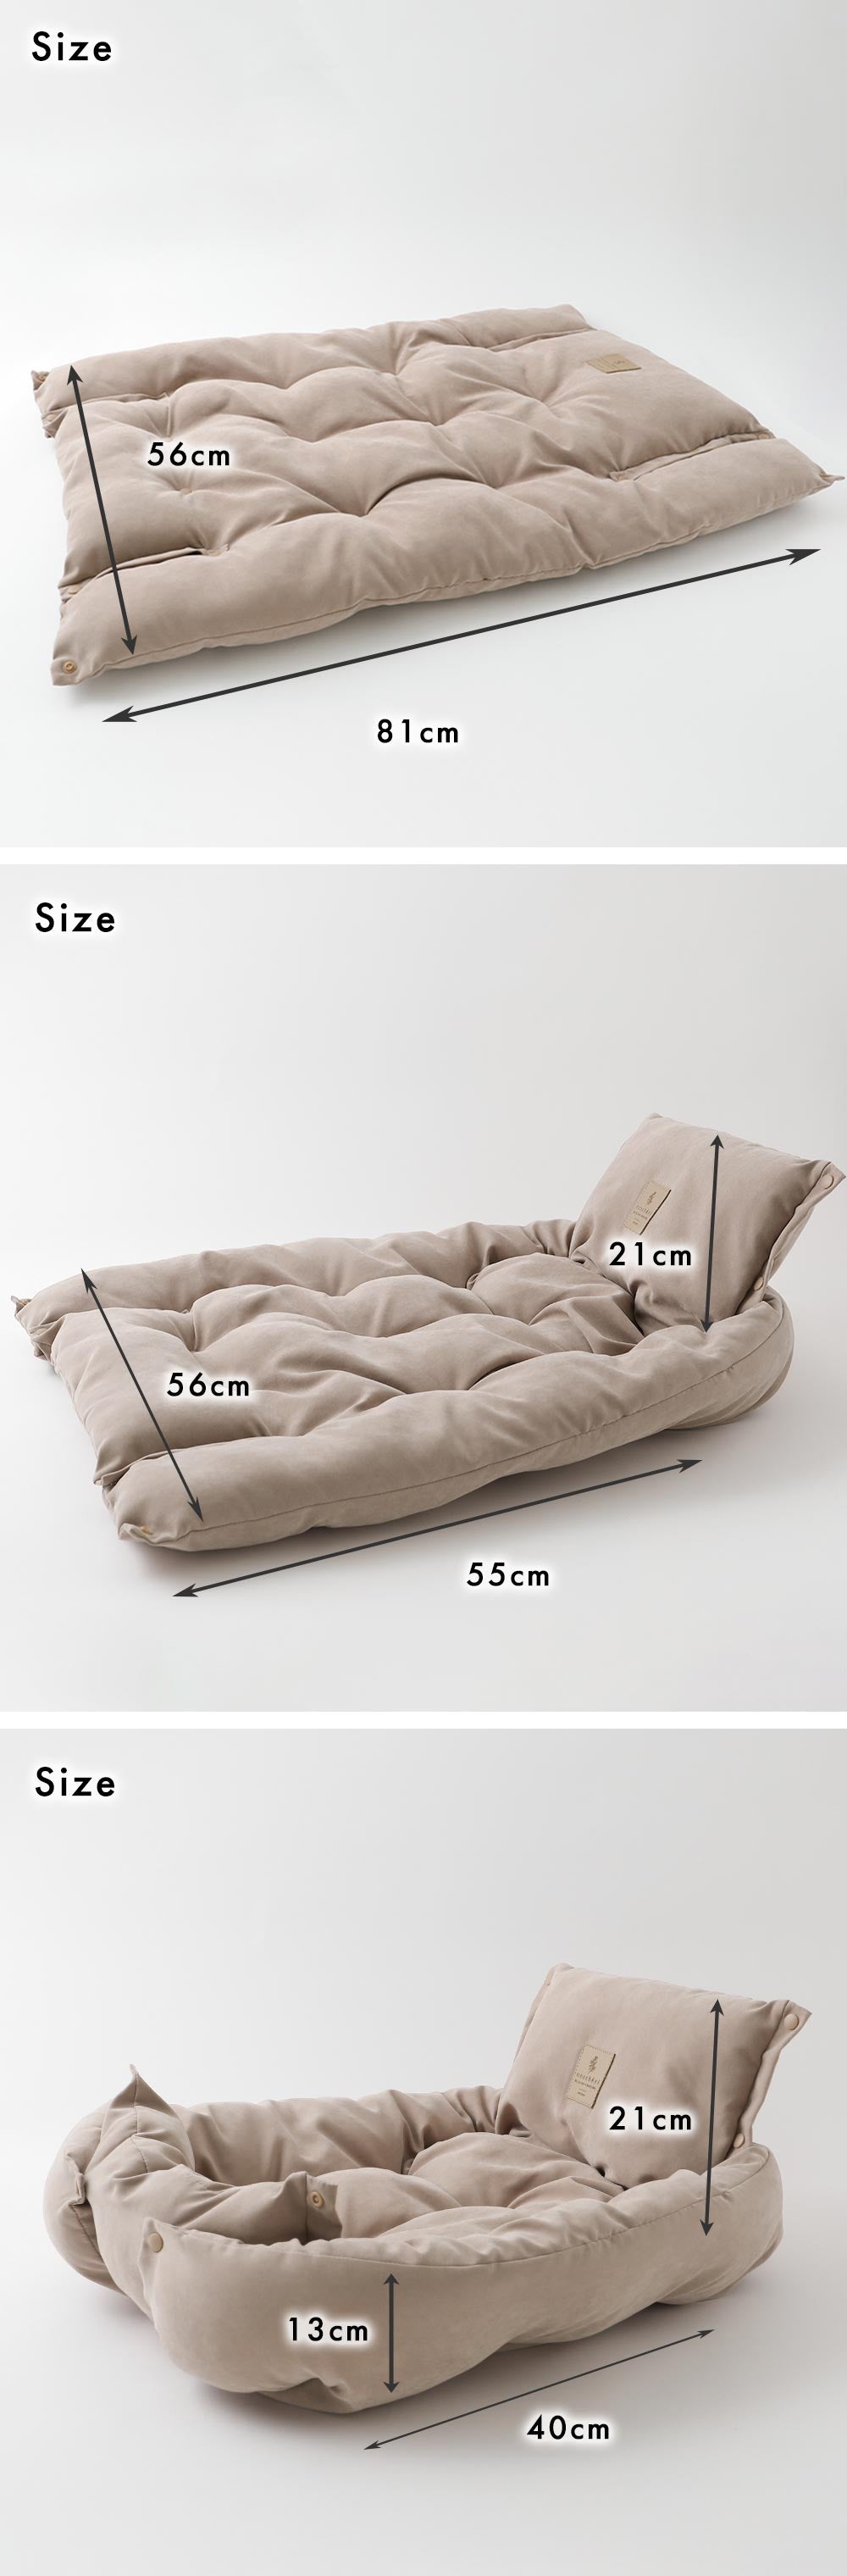 Small dog/bed/cushion/mat/3AWY/color variation/size